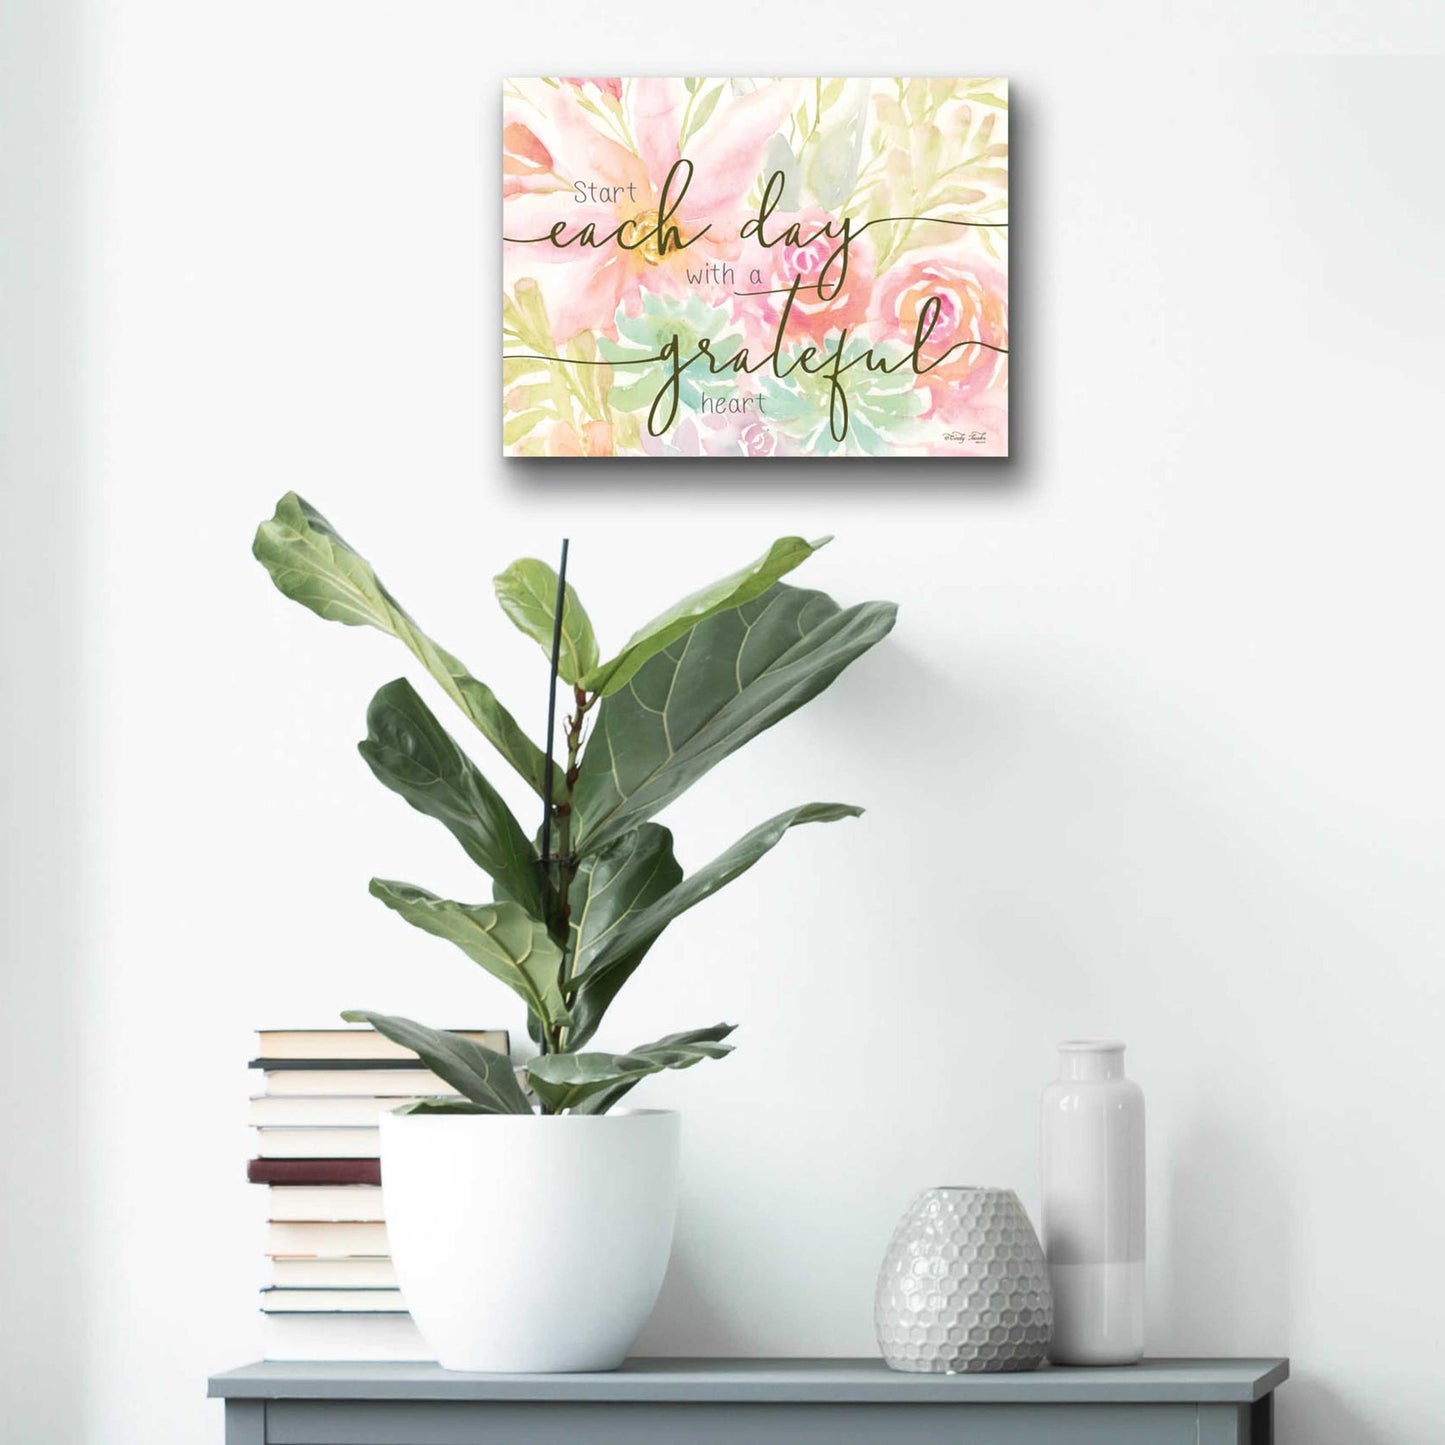 Epic Art 'Floral Grateful Heart' by Cindy Jacobs, Acrylic Glass Wall Art,16x12